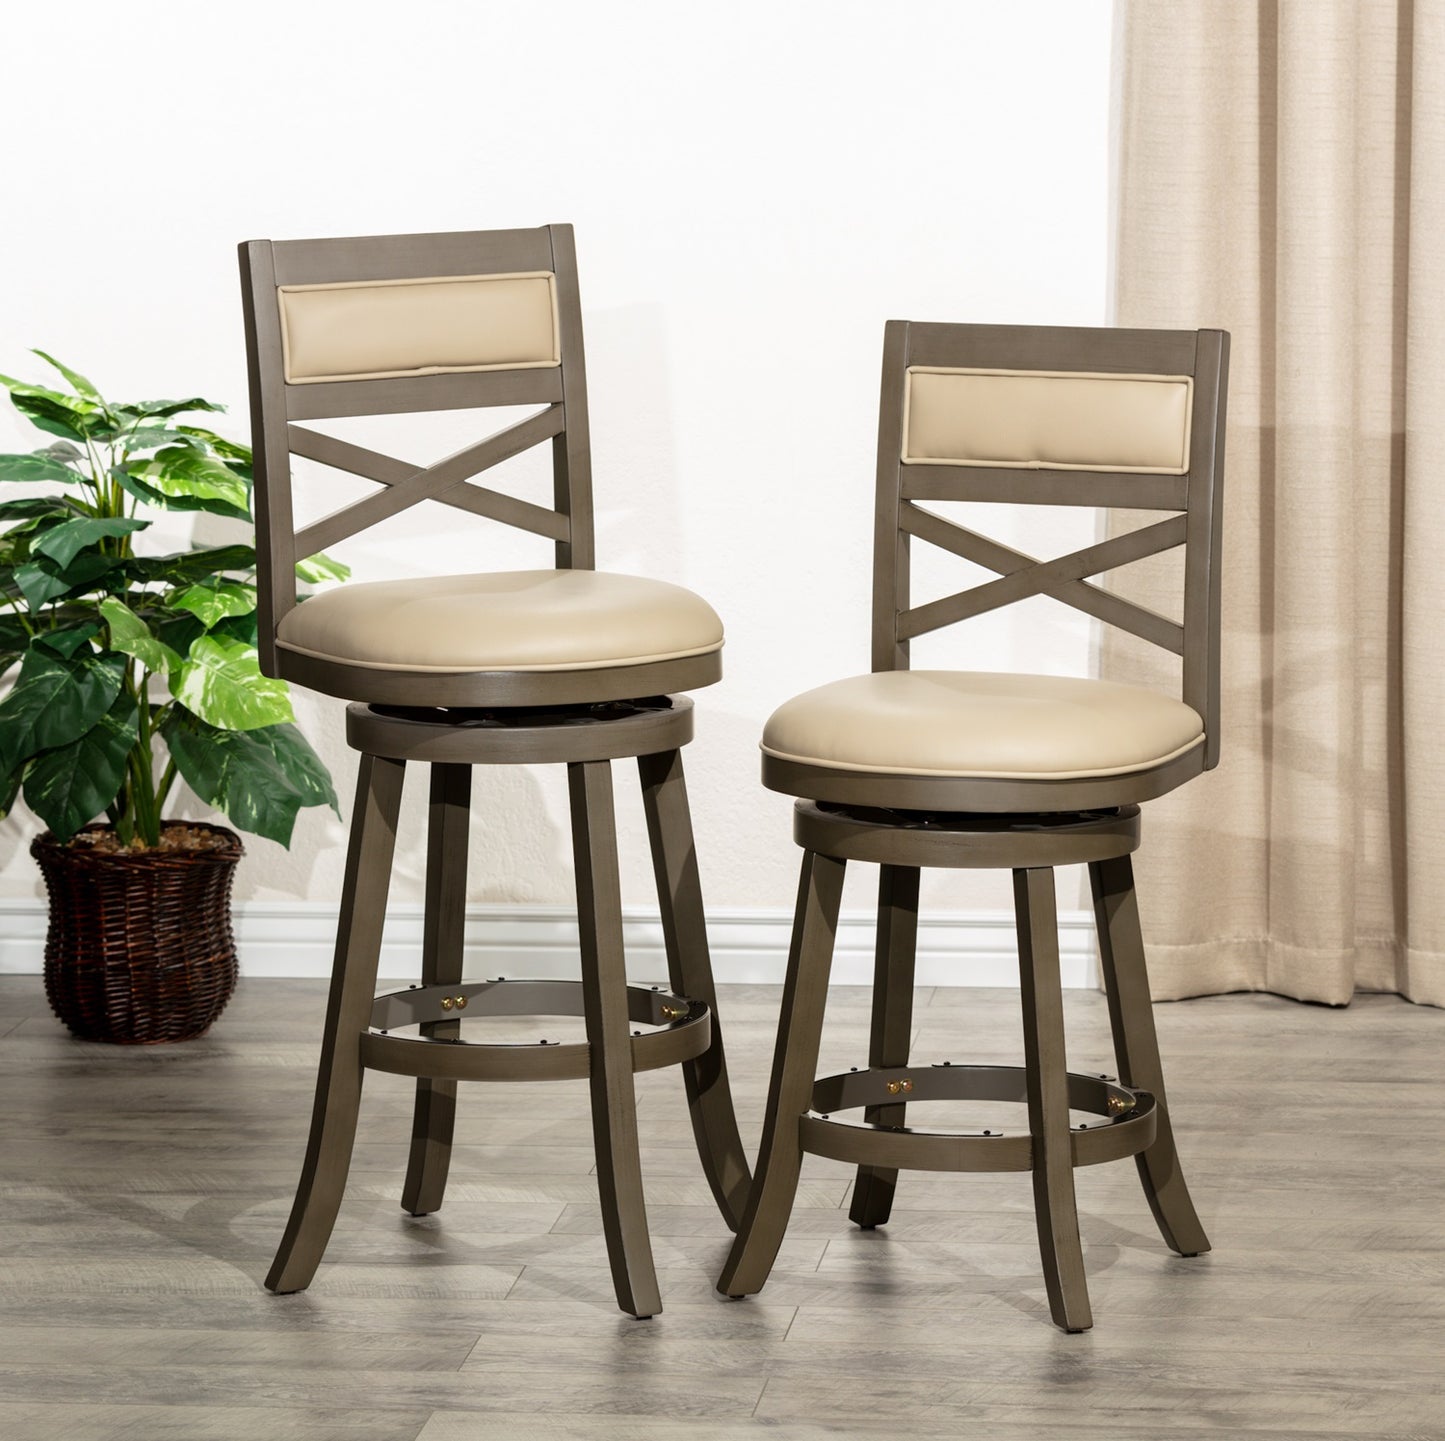 1st Choice Luxurious 30" X-Back Swivel Stool in French Gray - Perfect for Any Home